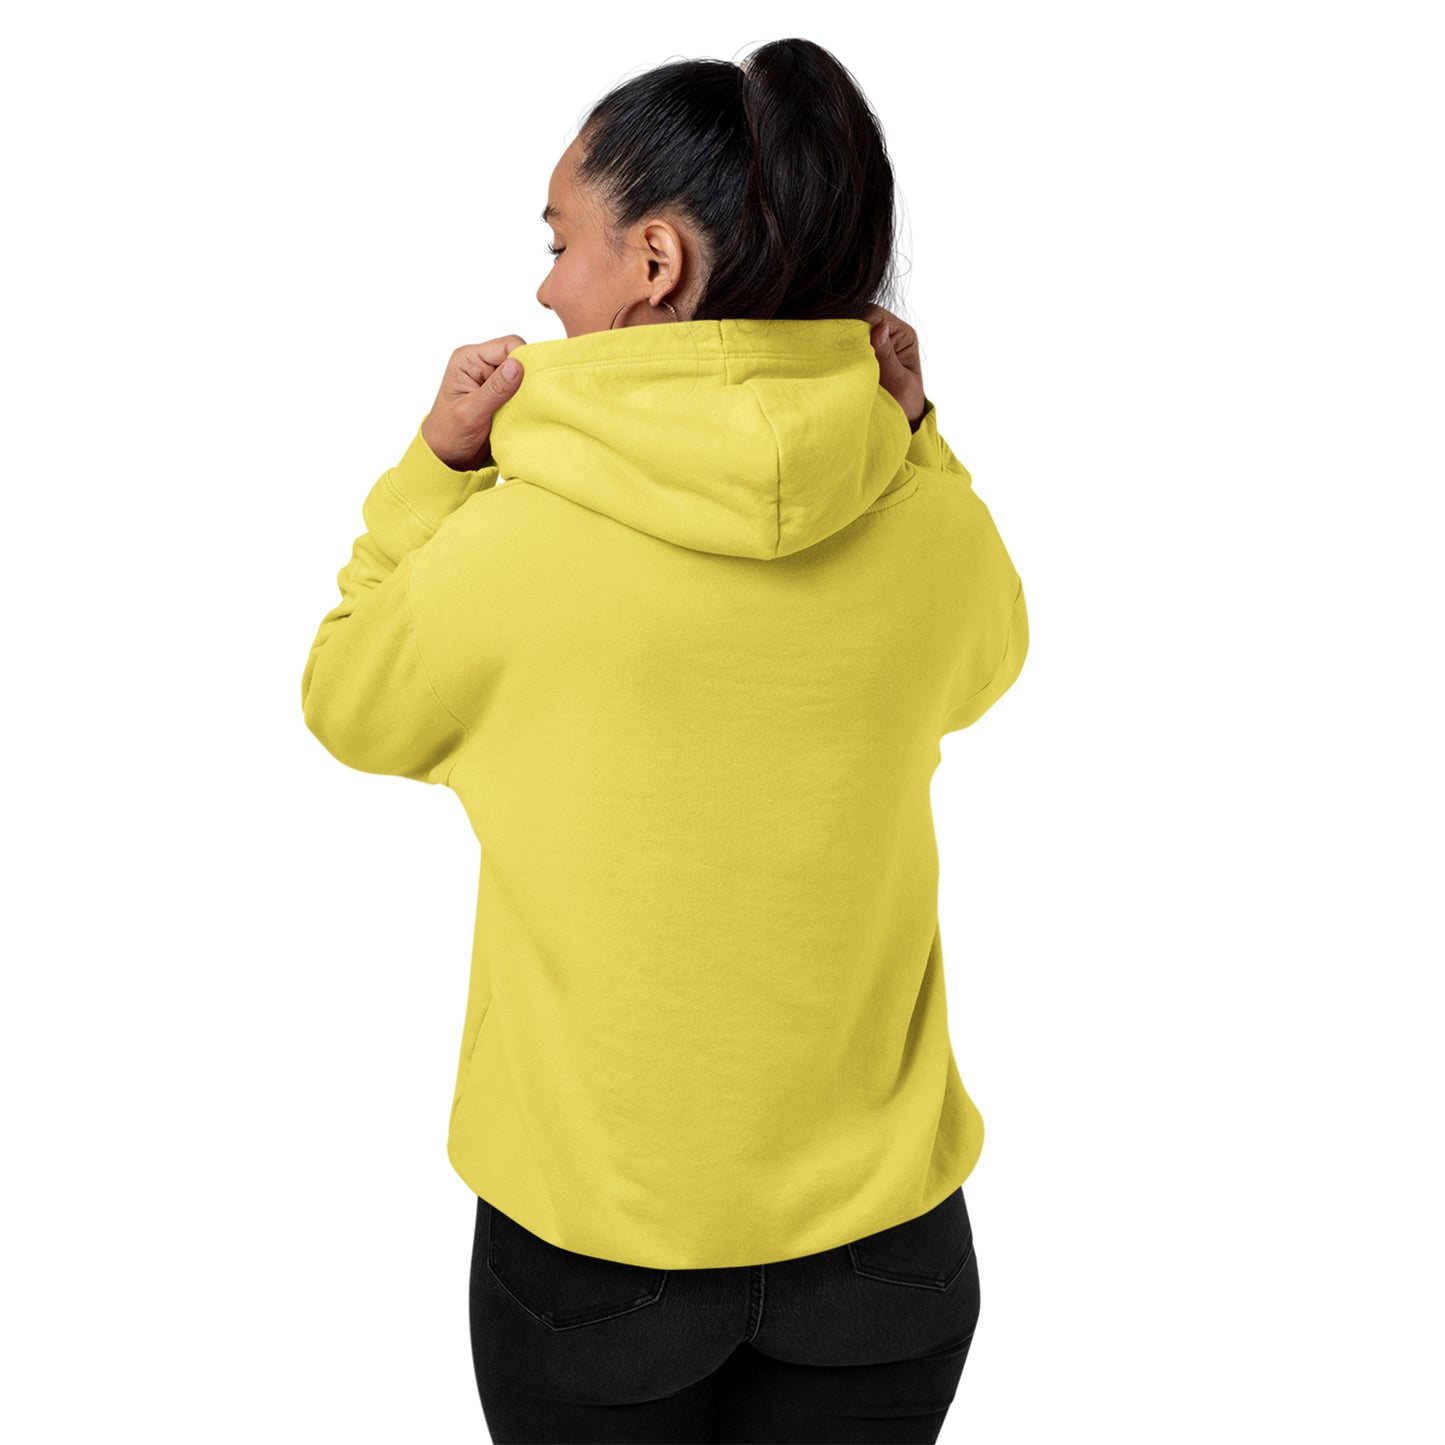 Neo Garments Women's Cotton Fashion Hooded Pullover Sweatshirt with Kangaroo Pockets | PUPPIES | SIZES - S - 36" TO 3XL - 46"